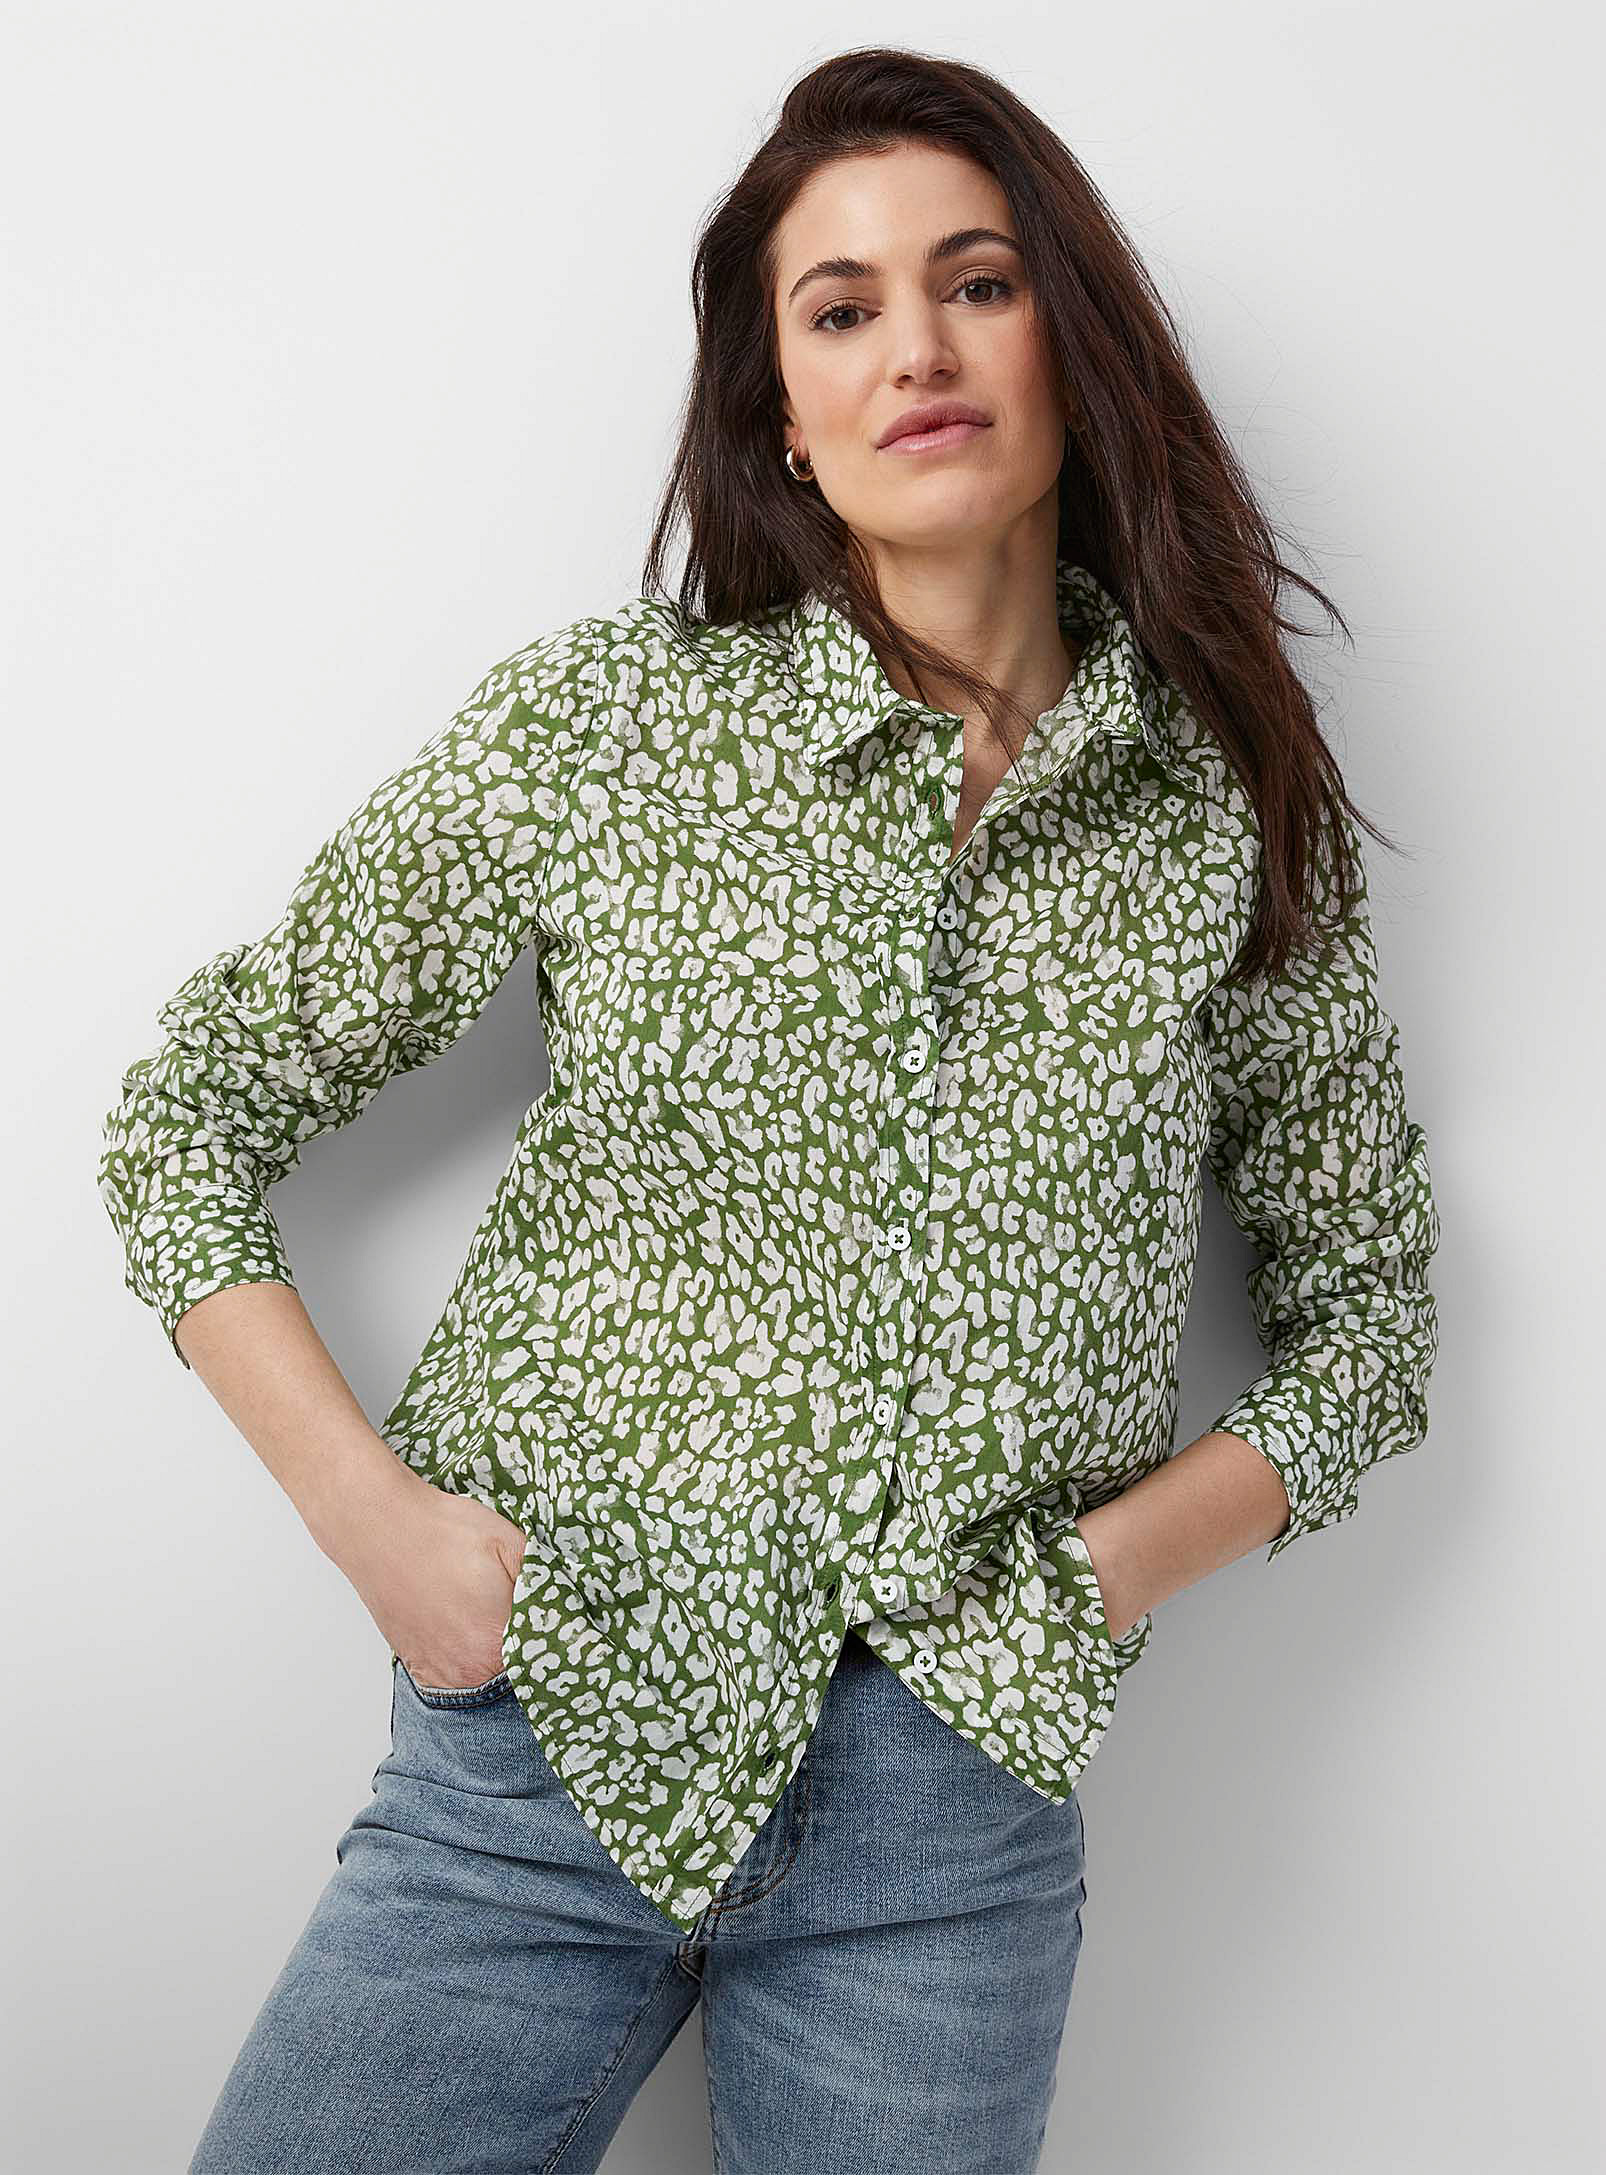 United Colors Of Benetton Vibrant Pattern Lightweight Shirt In Patterned Green